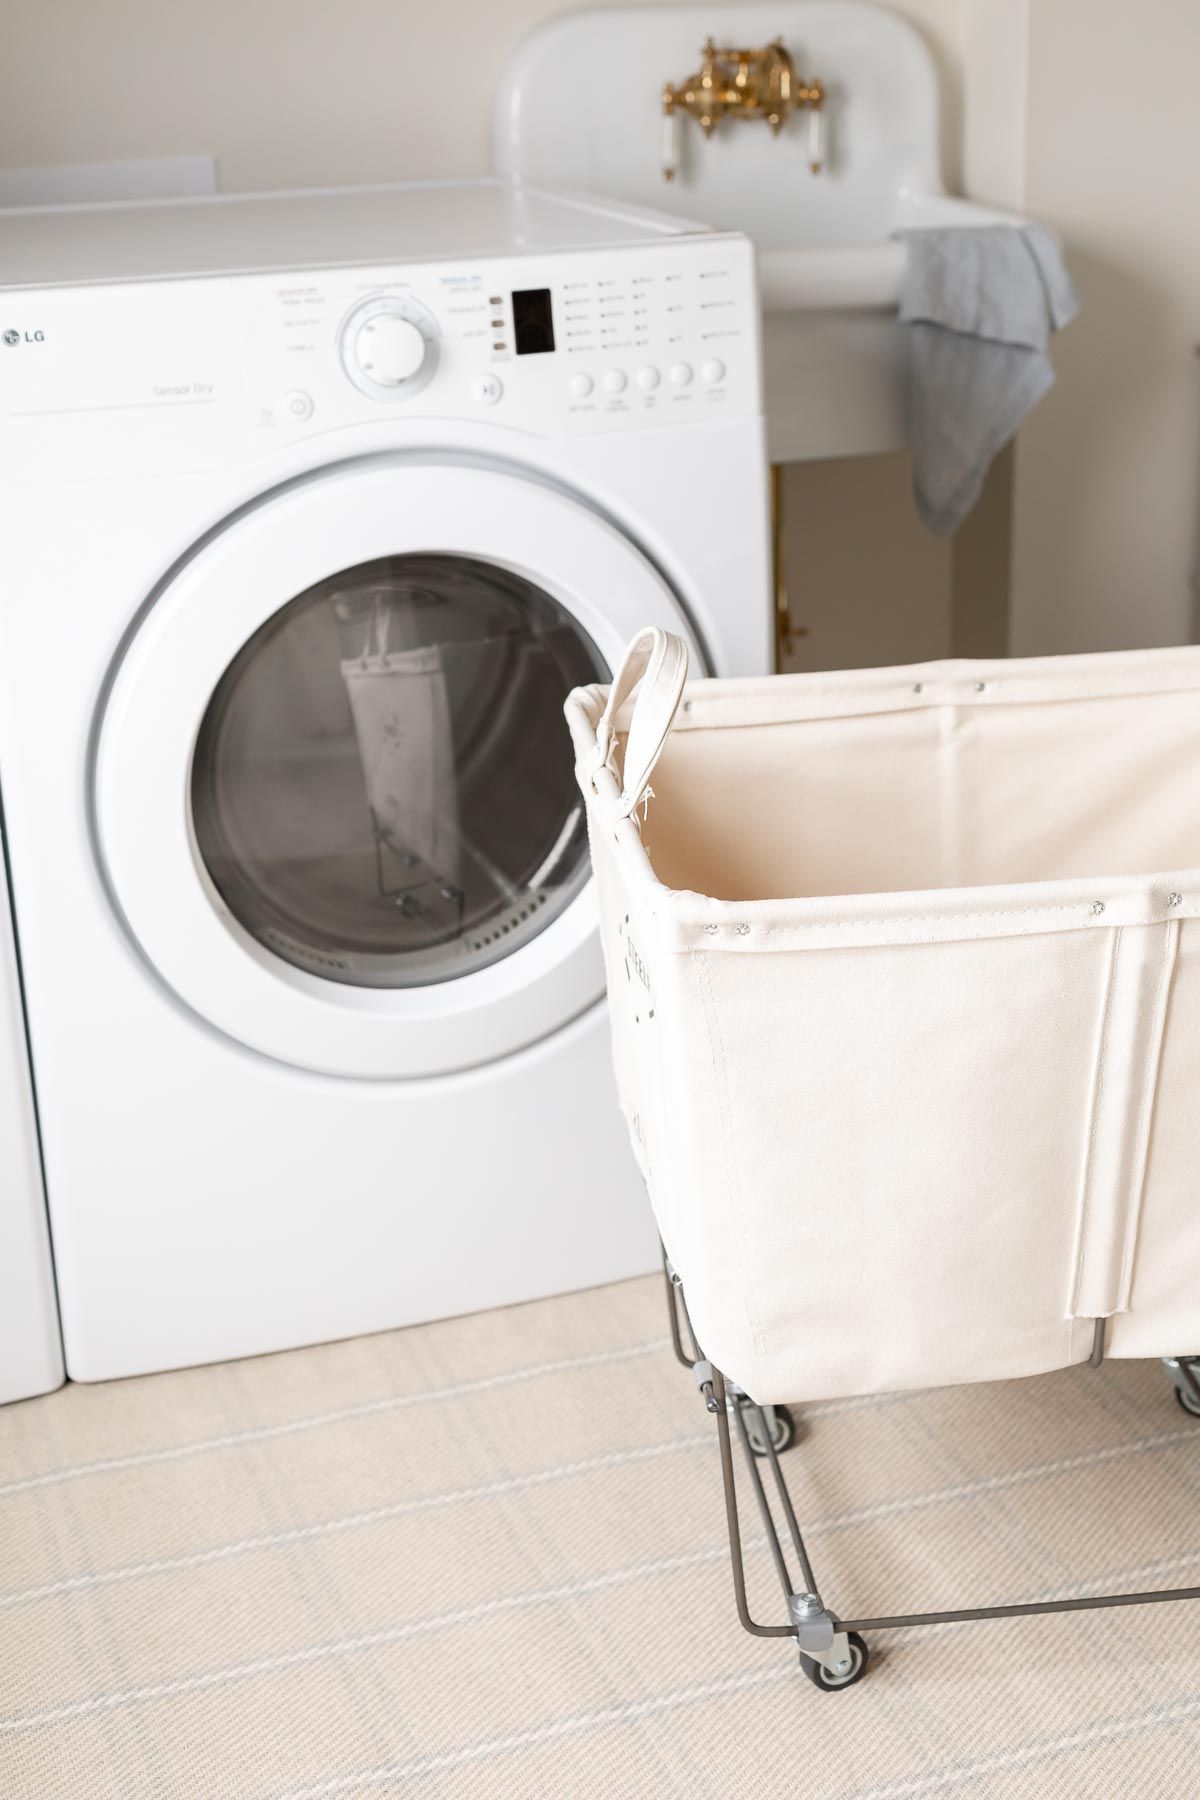 A laundry room with a white dryer, a vintage laundry basket in front, placed on top of plaid rugs on carpet